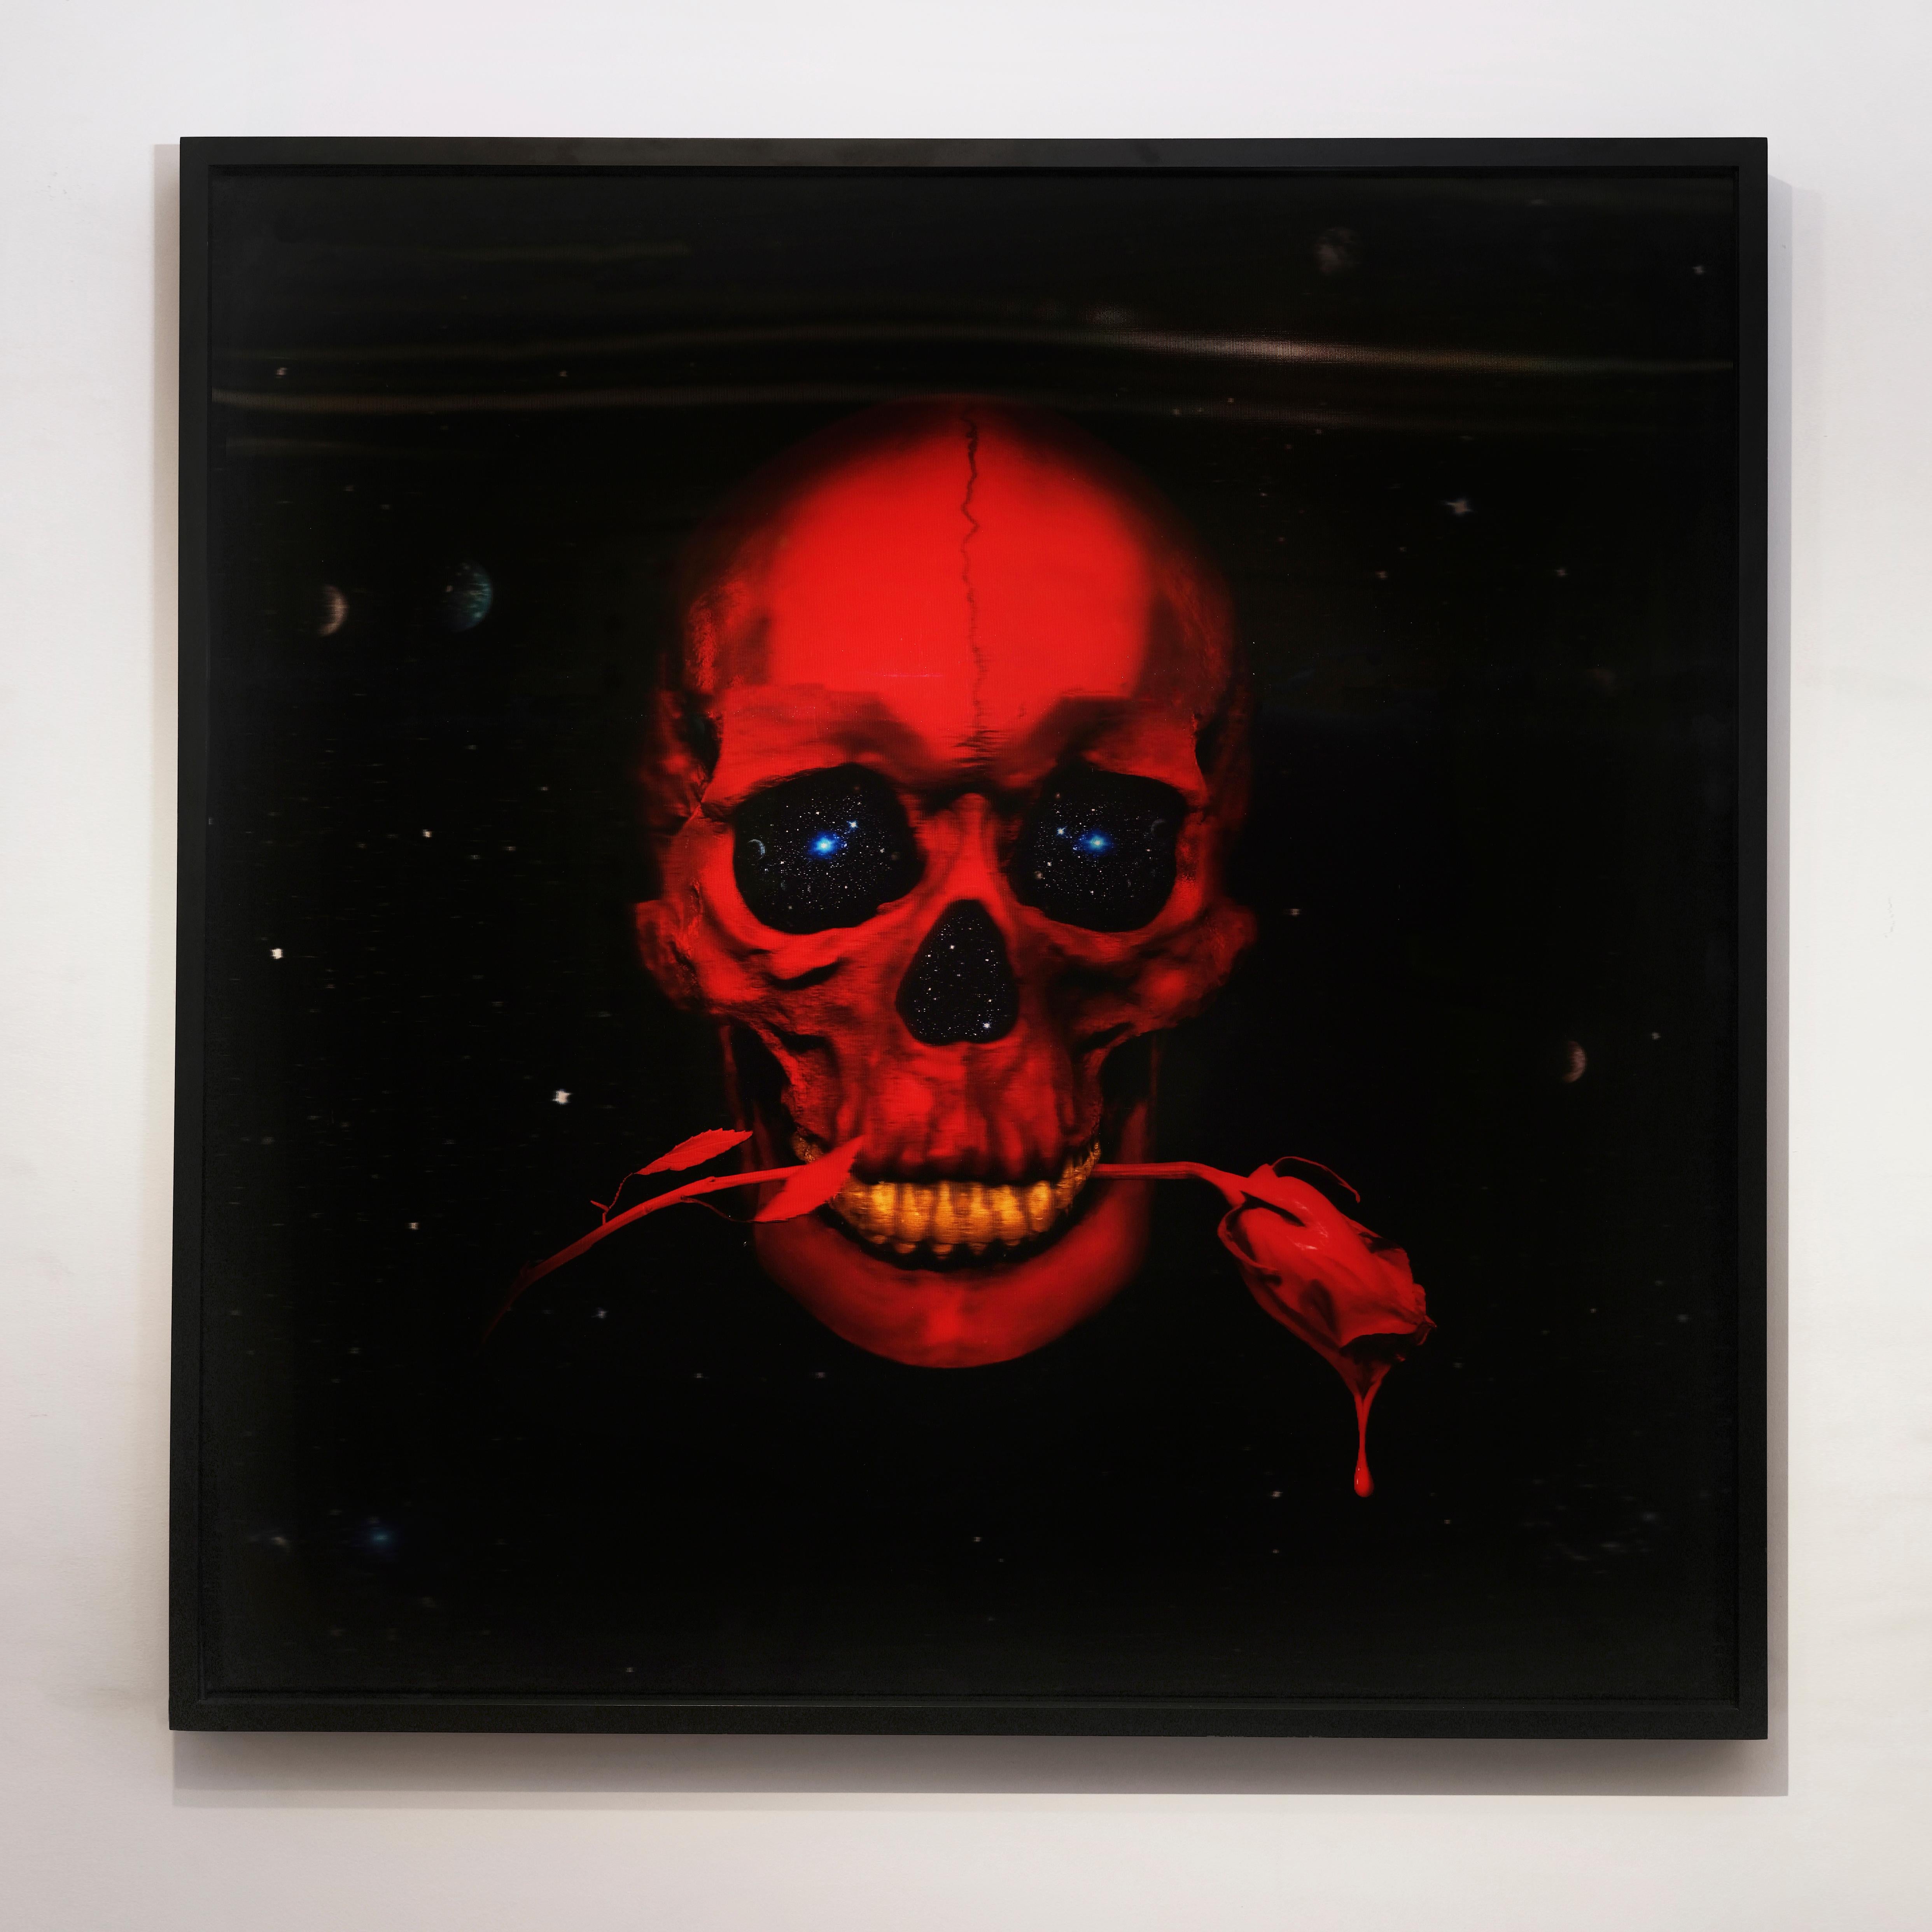 "Skull SKR8DL LED 3D Lenticular" Photography 40x40 in. Ed. 1/8 by Giuliano Bekor

From the SKULL series
Title: Skull SKR8DL LED 3D Lenticular
Year: 2018
Print size: 40" x 40" Inch
Artwork finished size: 41" x 41" Inch
Edition: 1/8
Artist proof: